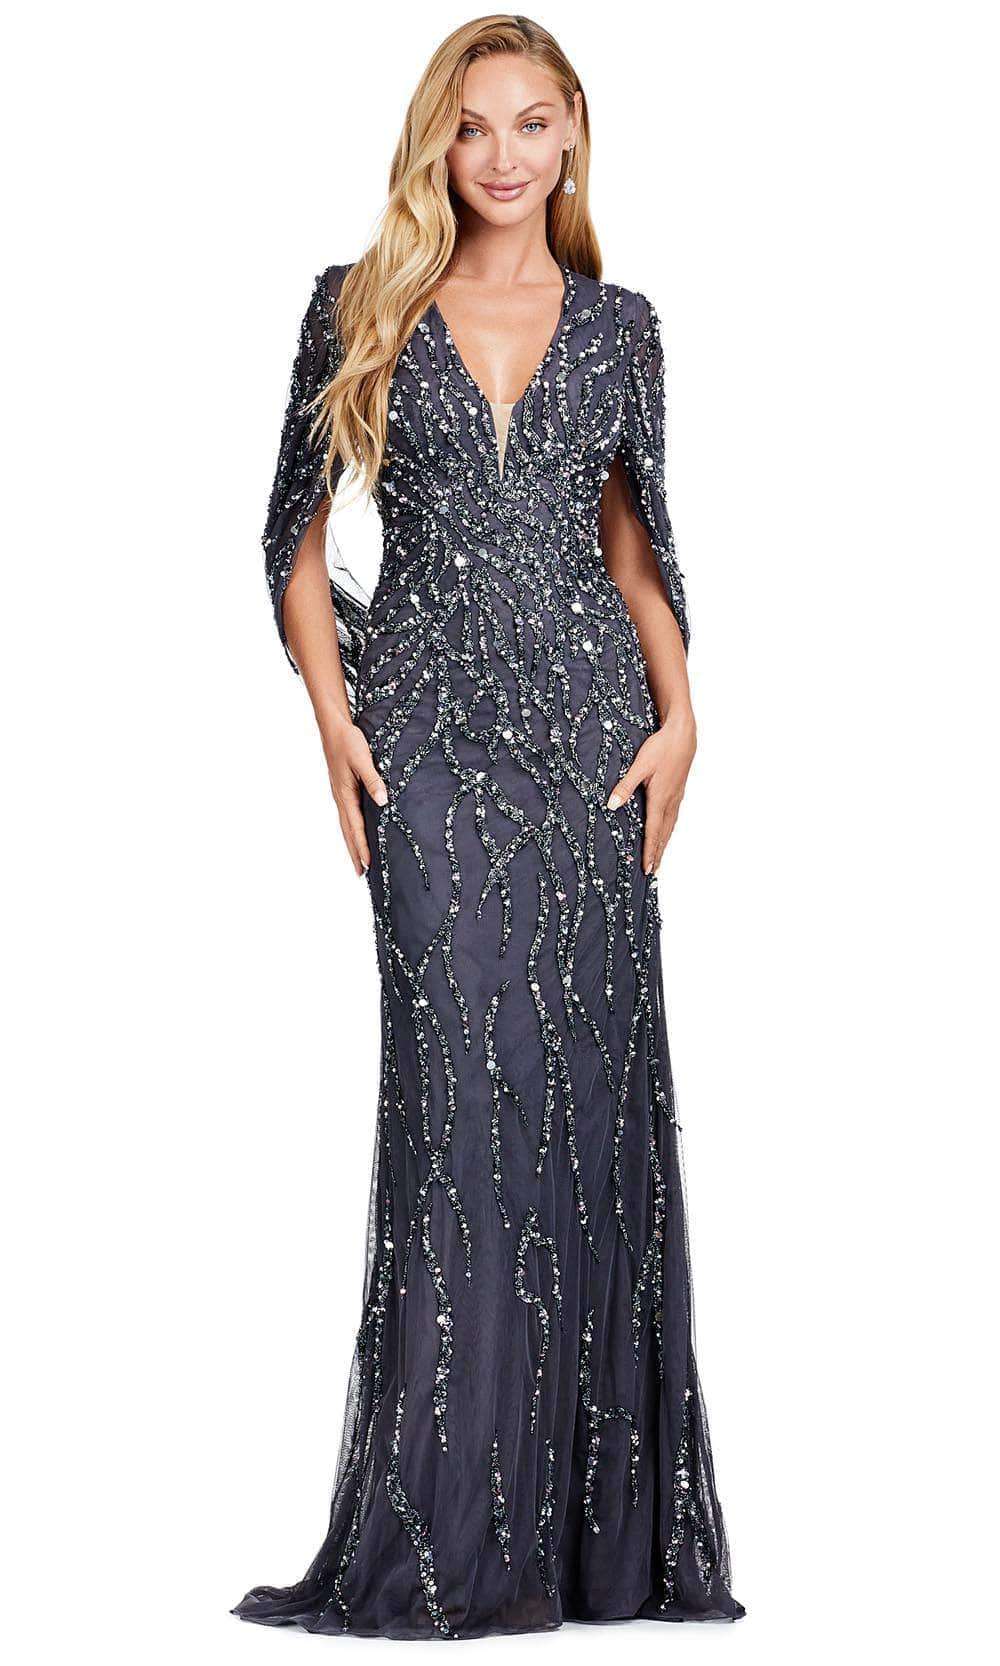 Image of Ashley Lauren 11430 - Cape Sleeve Beaded Evening Gown